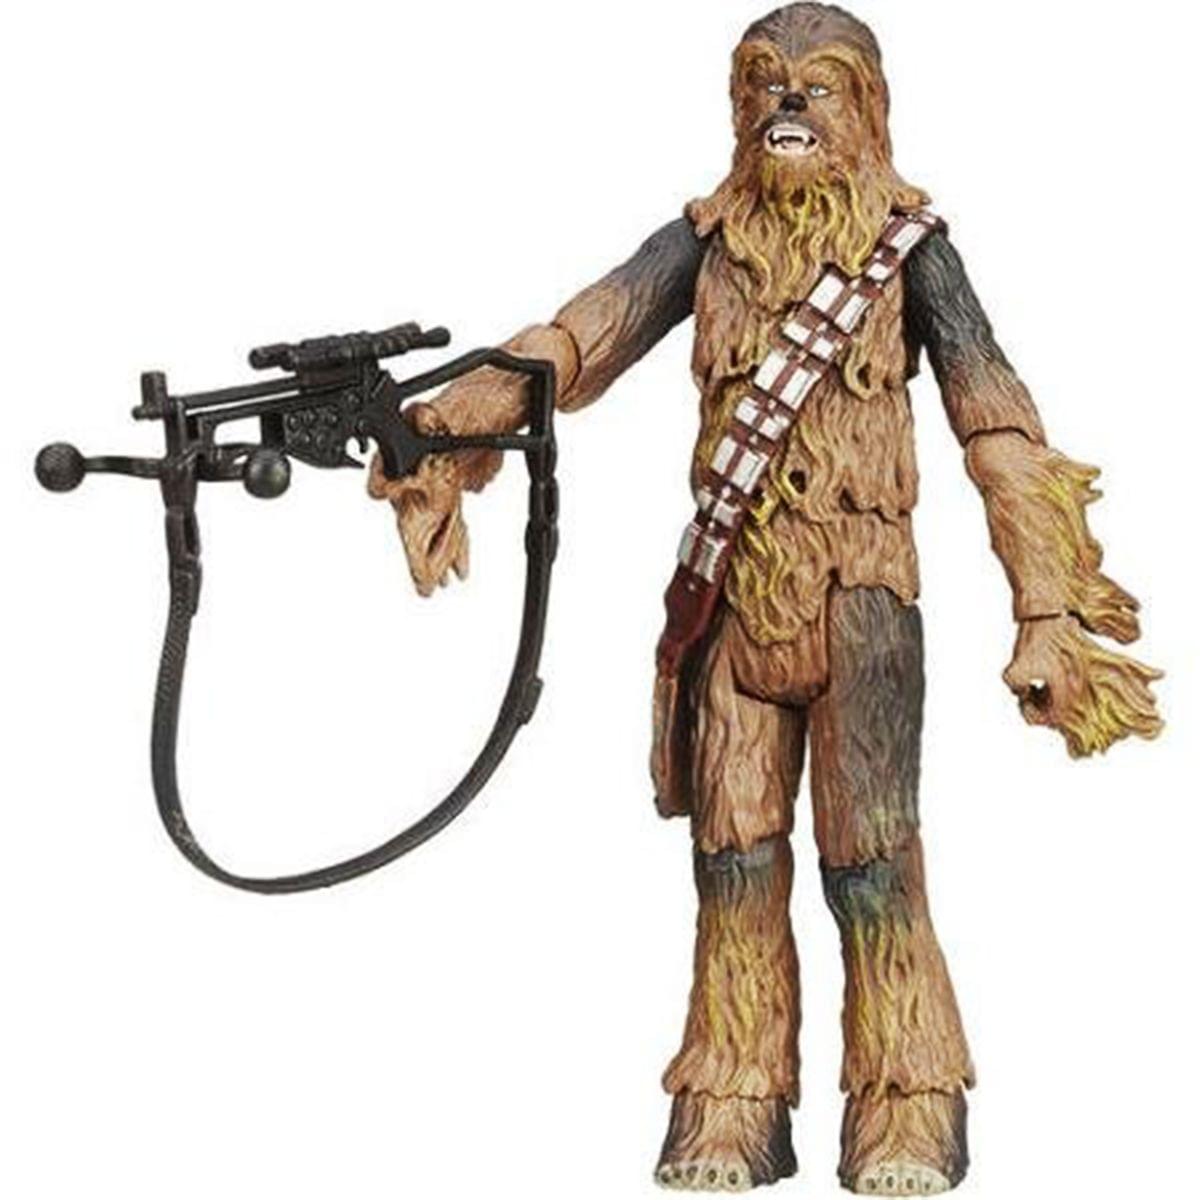 Star Wars Black Series 3.75" Action Figure: Chewbacca - image 2 of 3